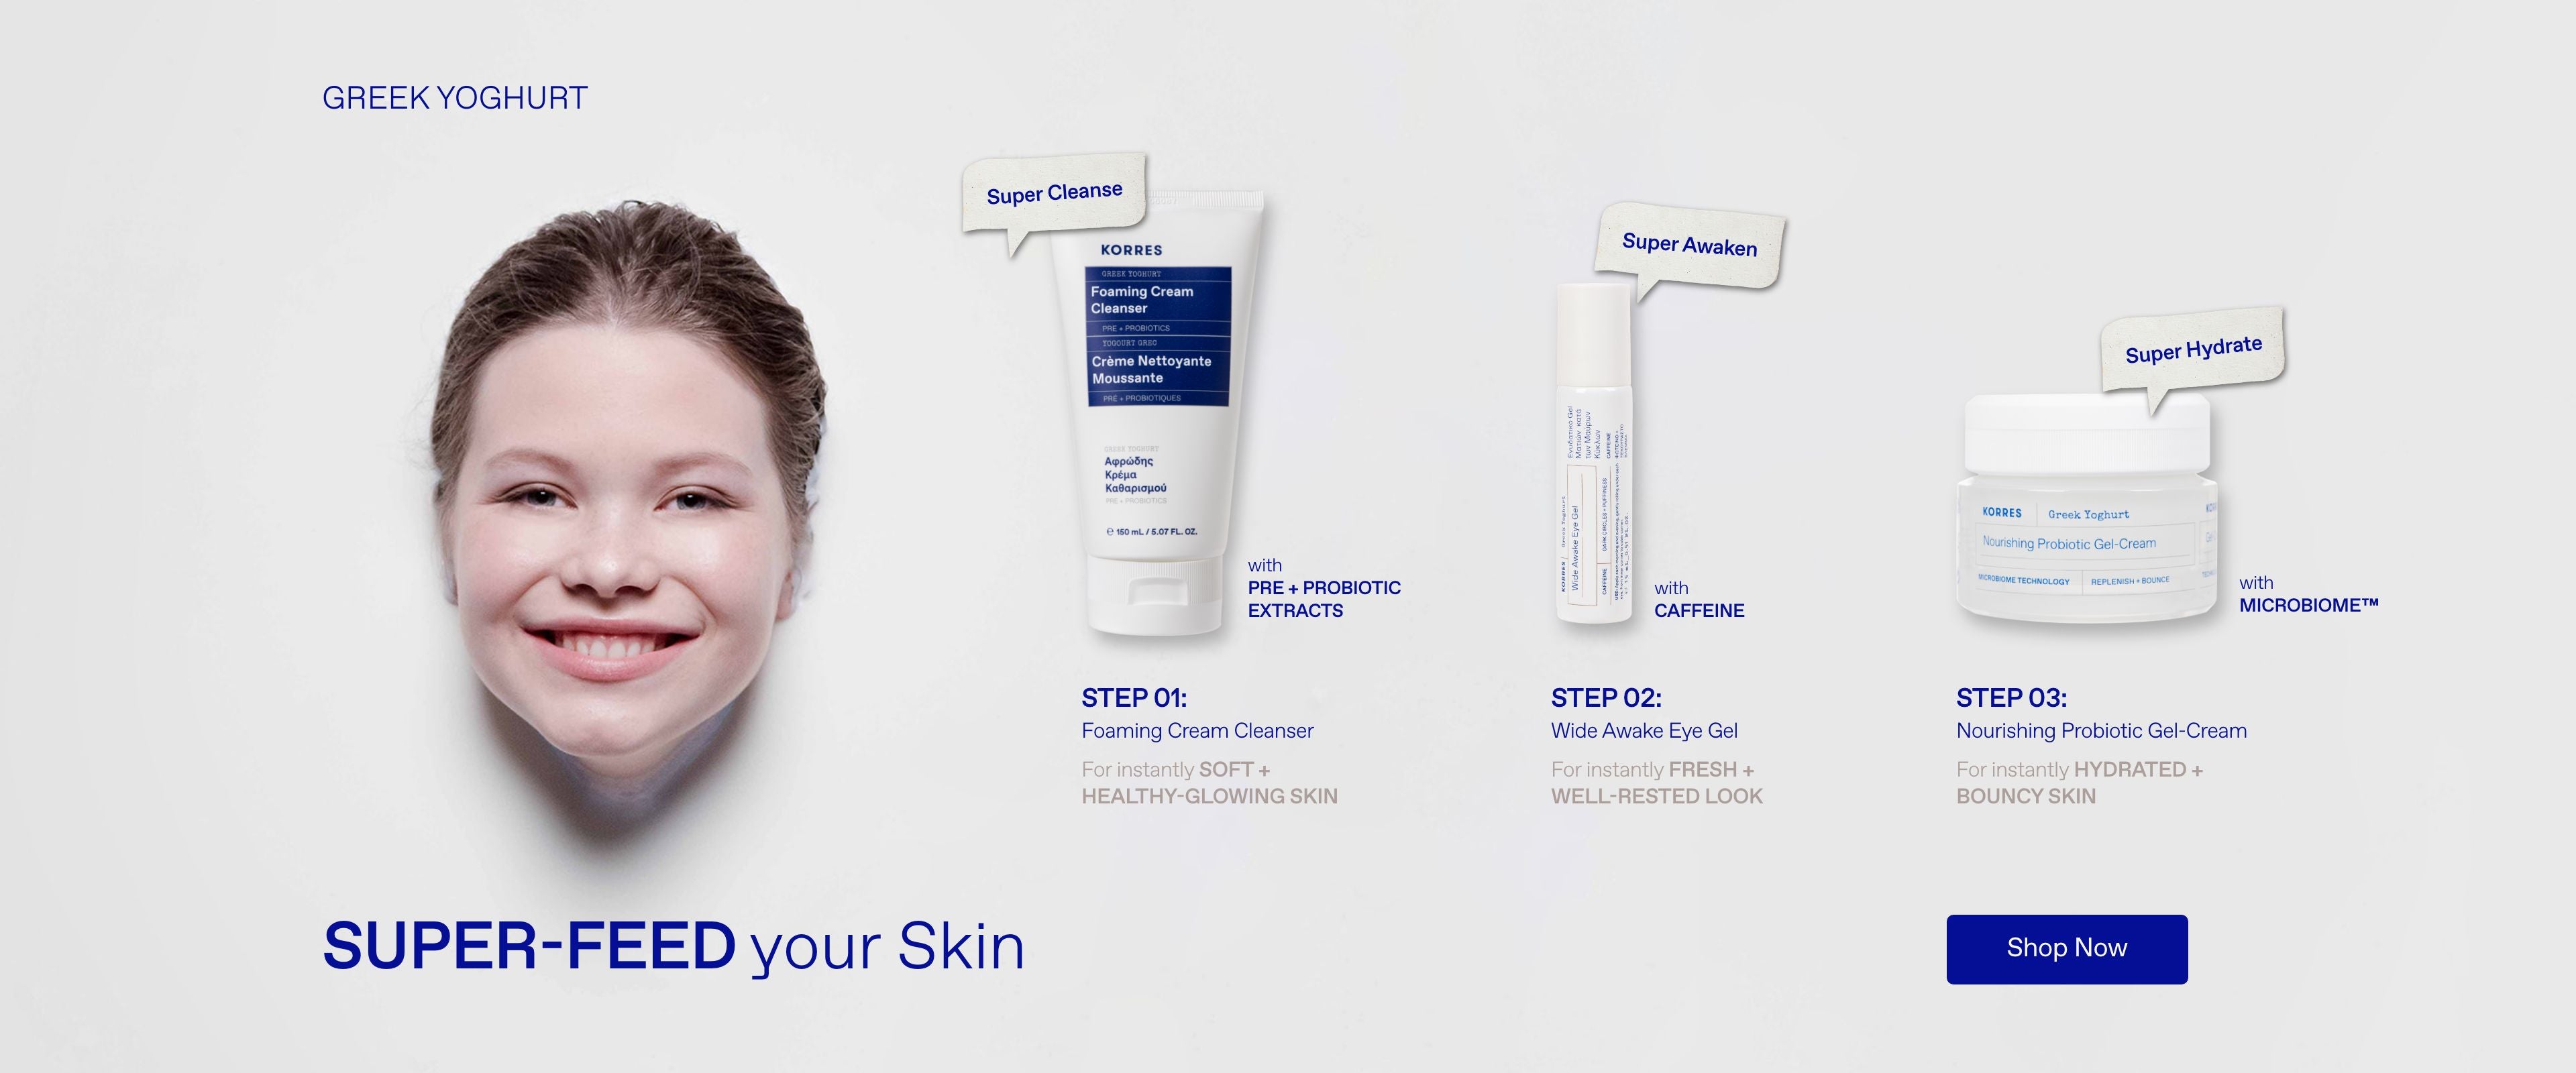 SUPER-FEED your Skin